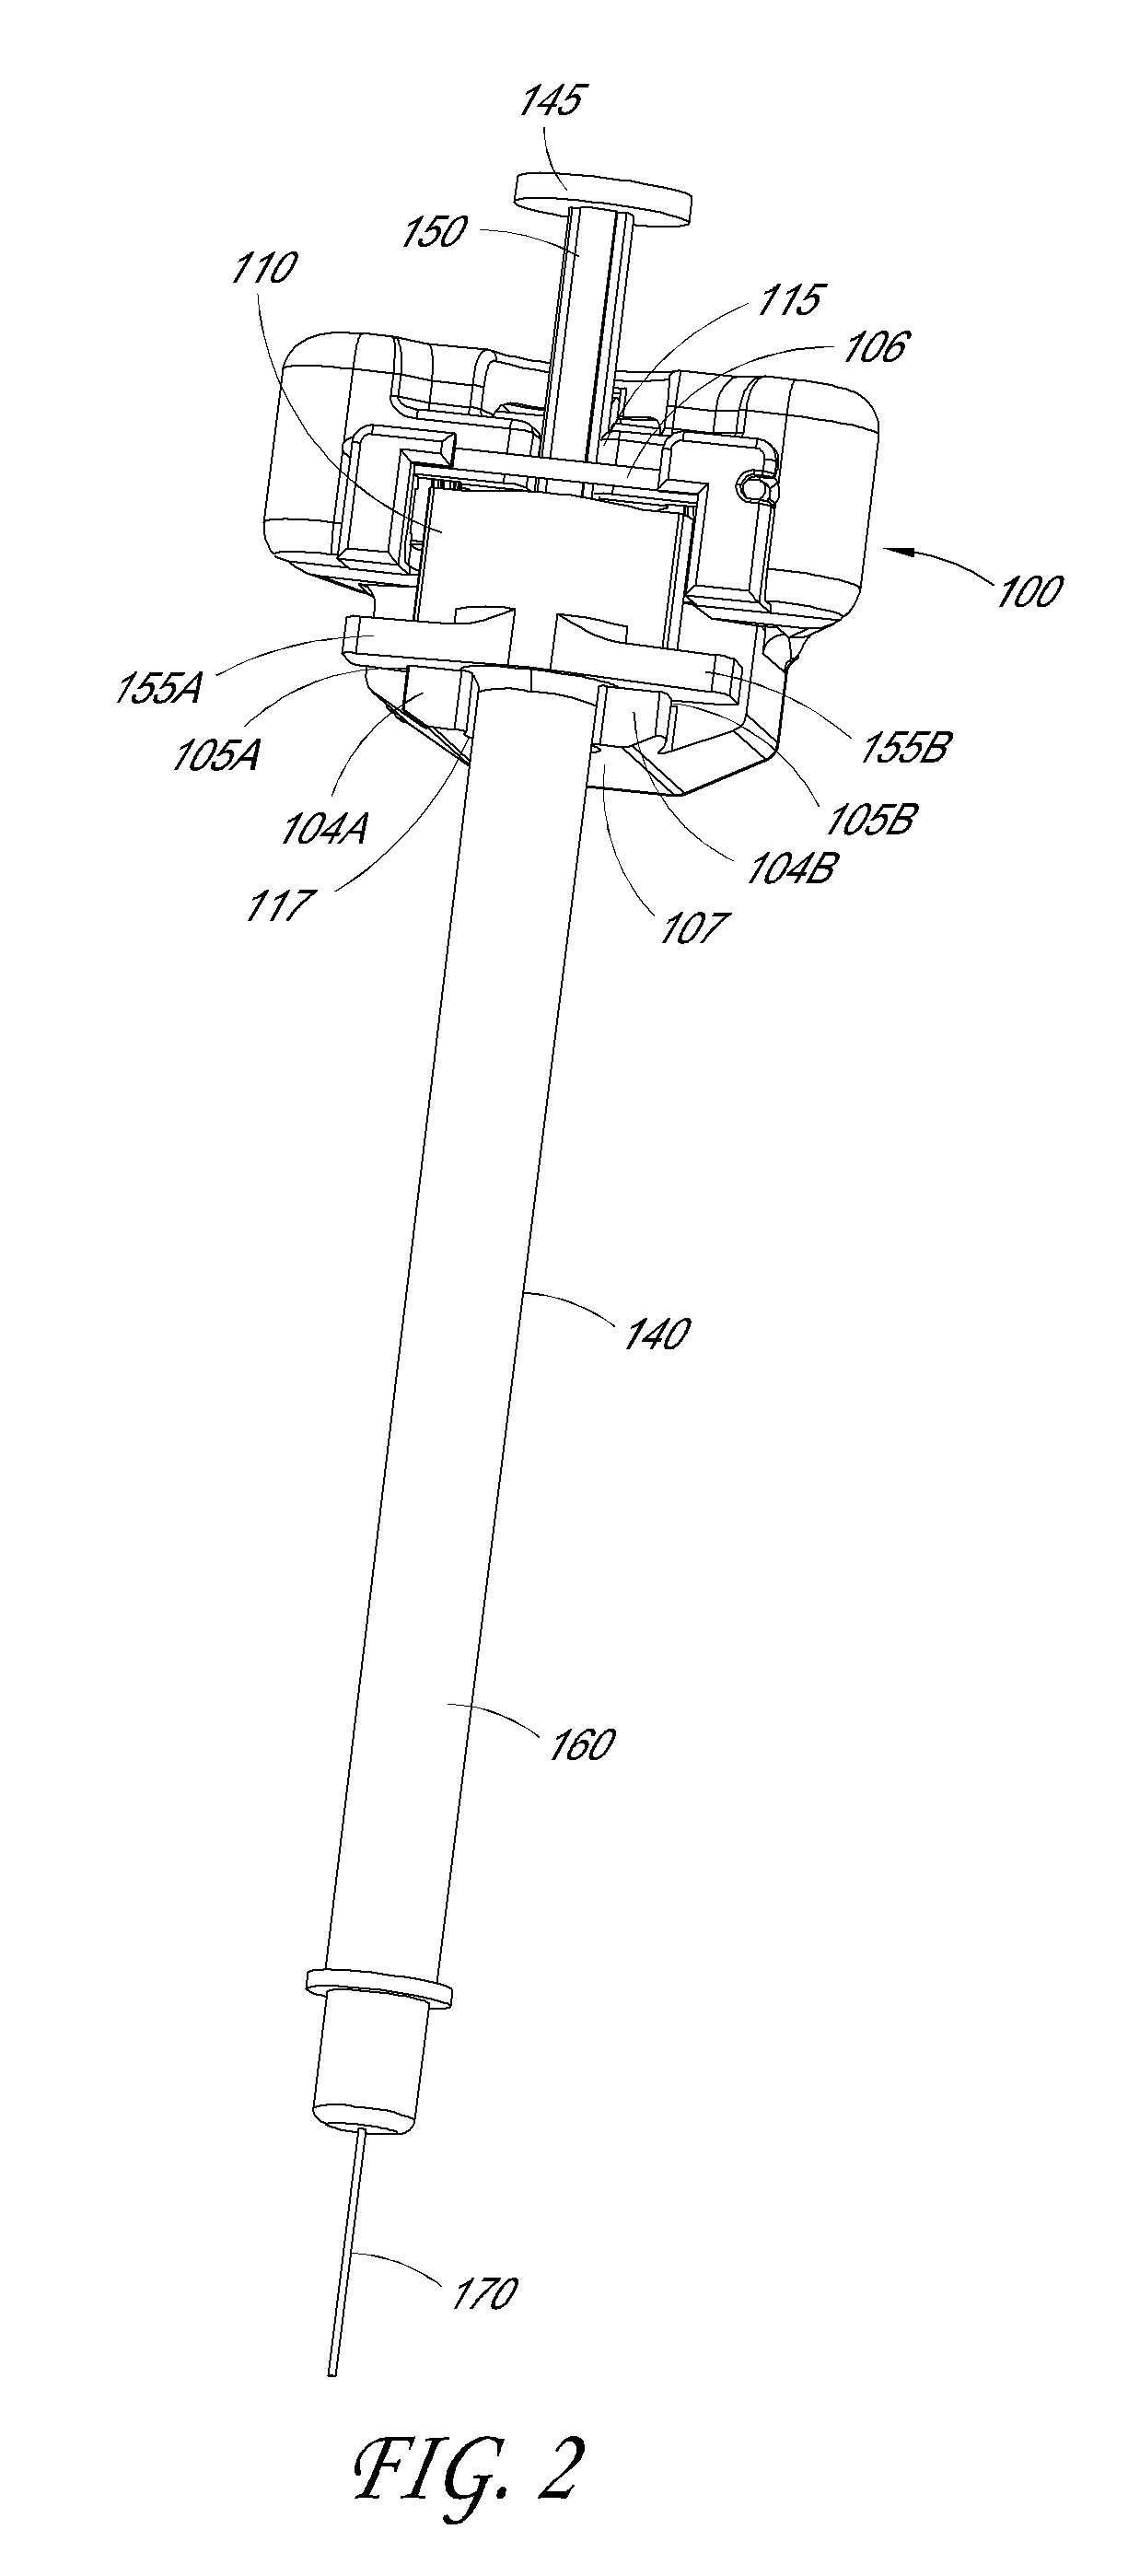 Dose capture device for syringes